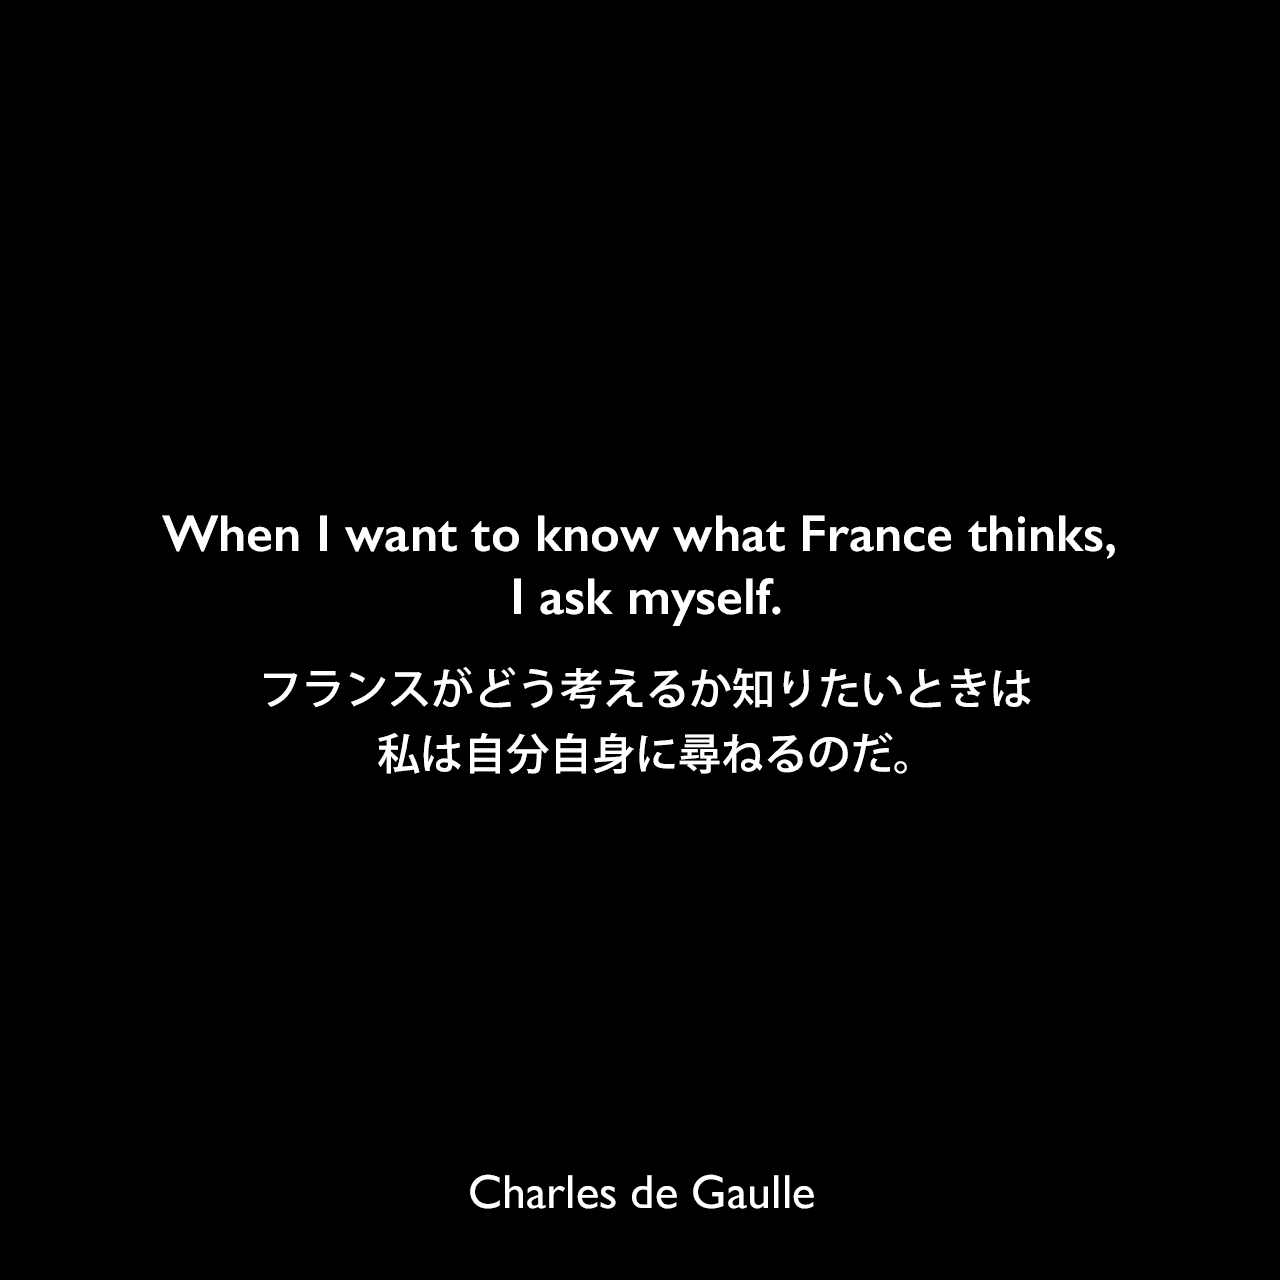 When I want to know what France thinks, I ask myself.フランスがどう考えるか知りたいときは、私は自分自身に尋ねるのだ。Charles de Gaulle